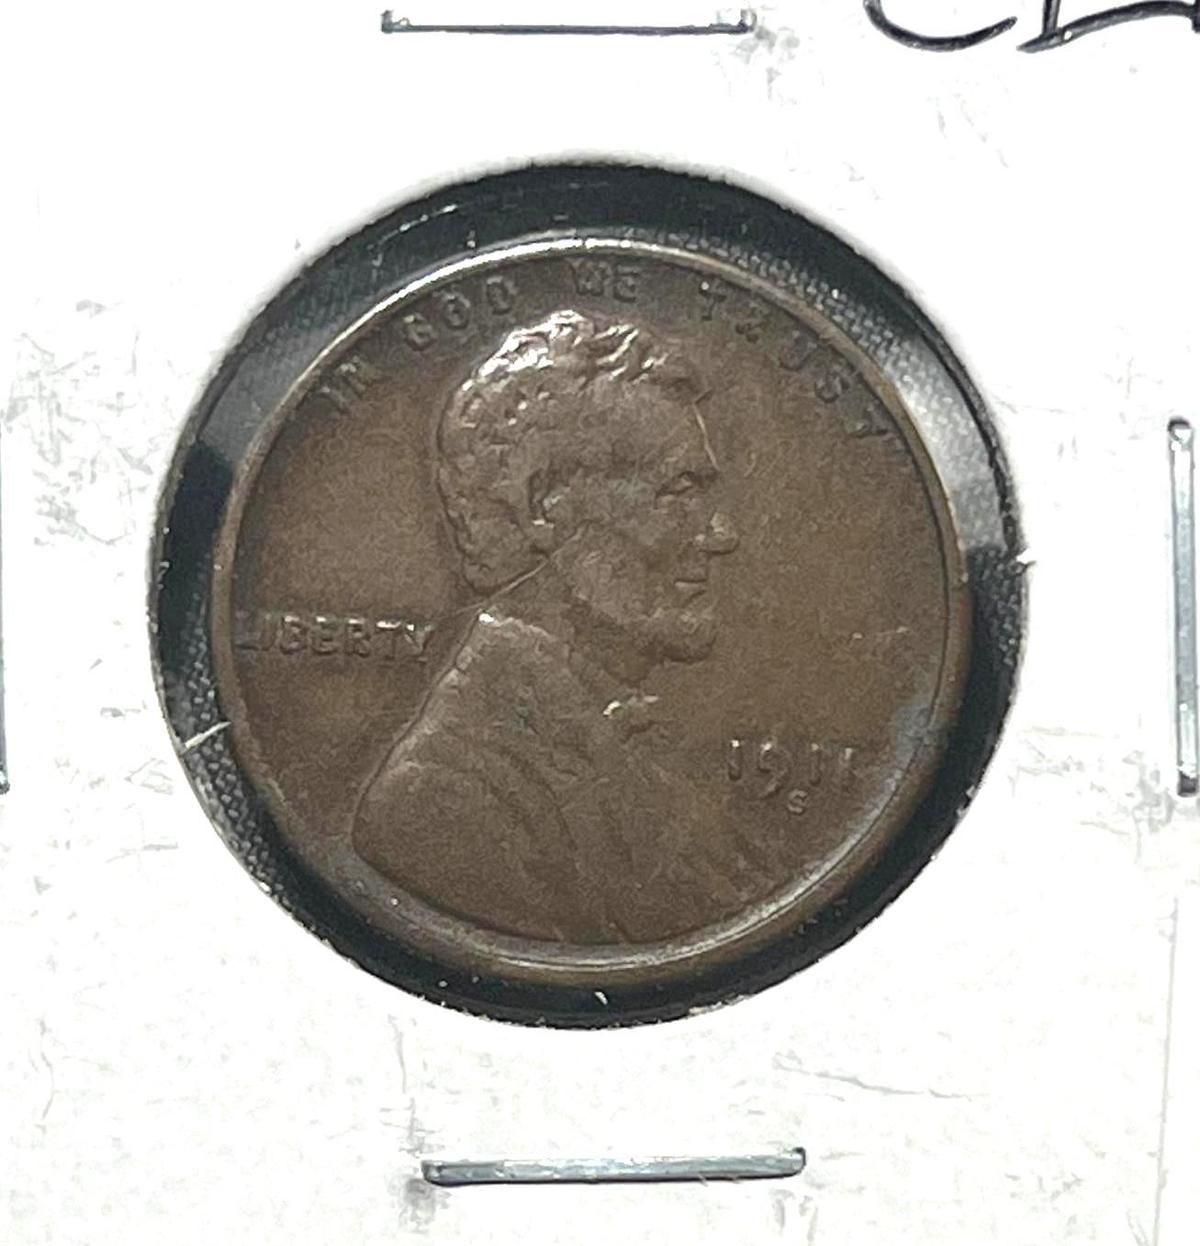 1911-S Lincoln Wheat Cent